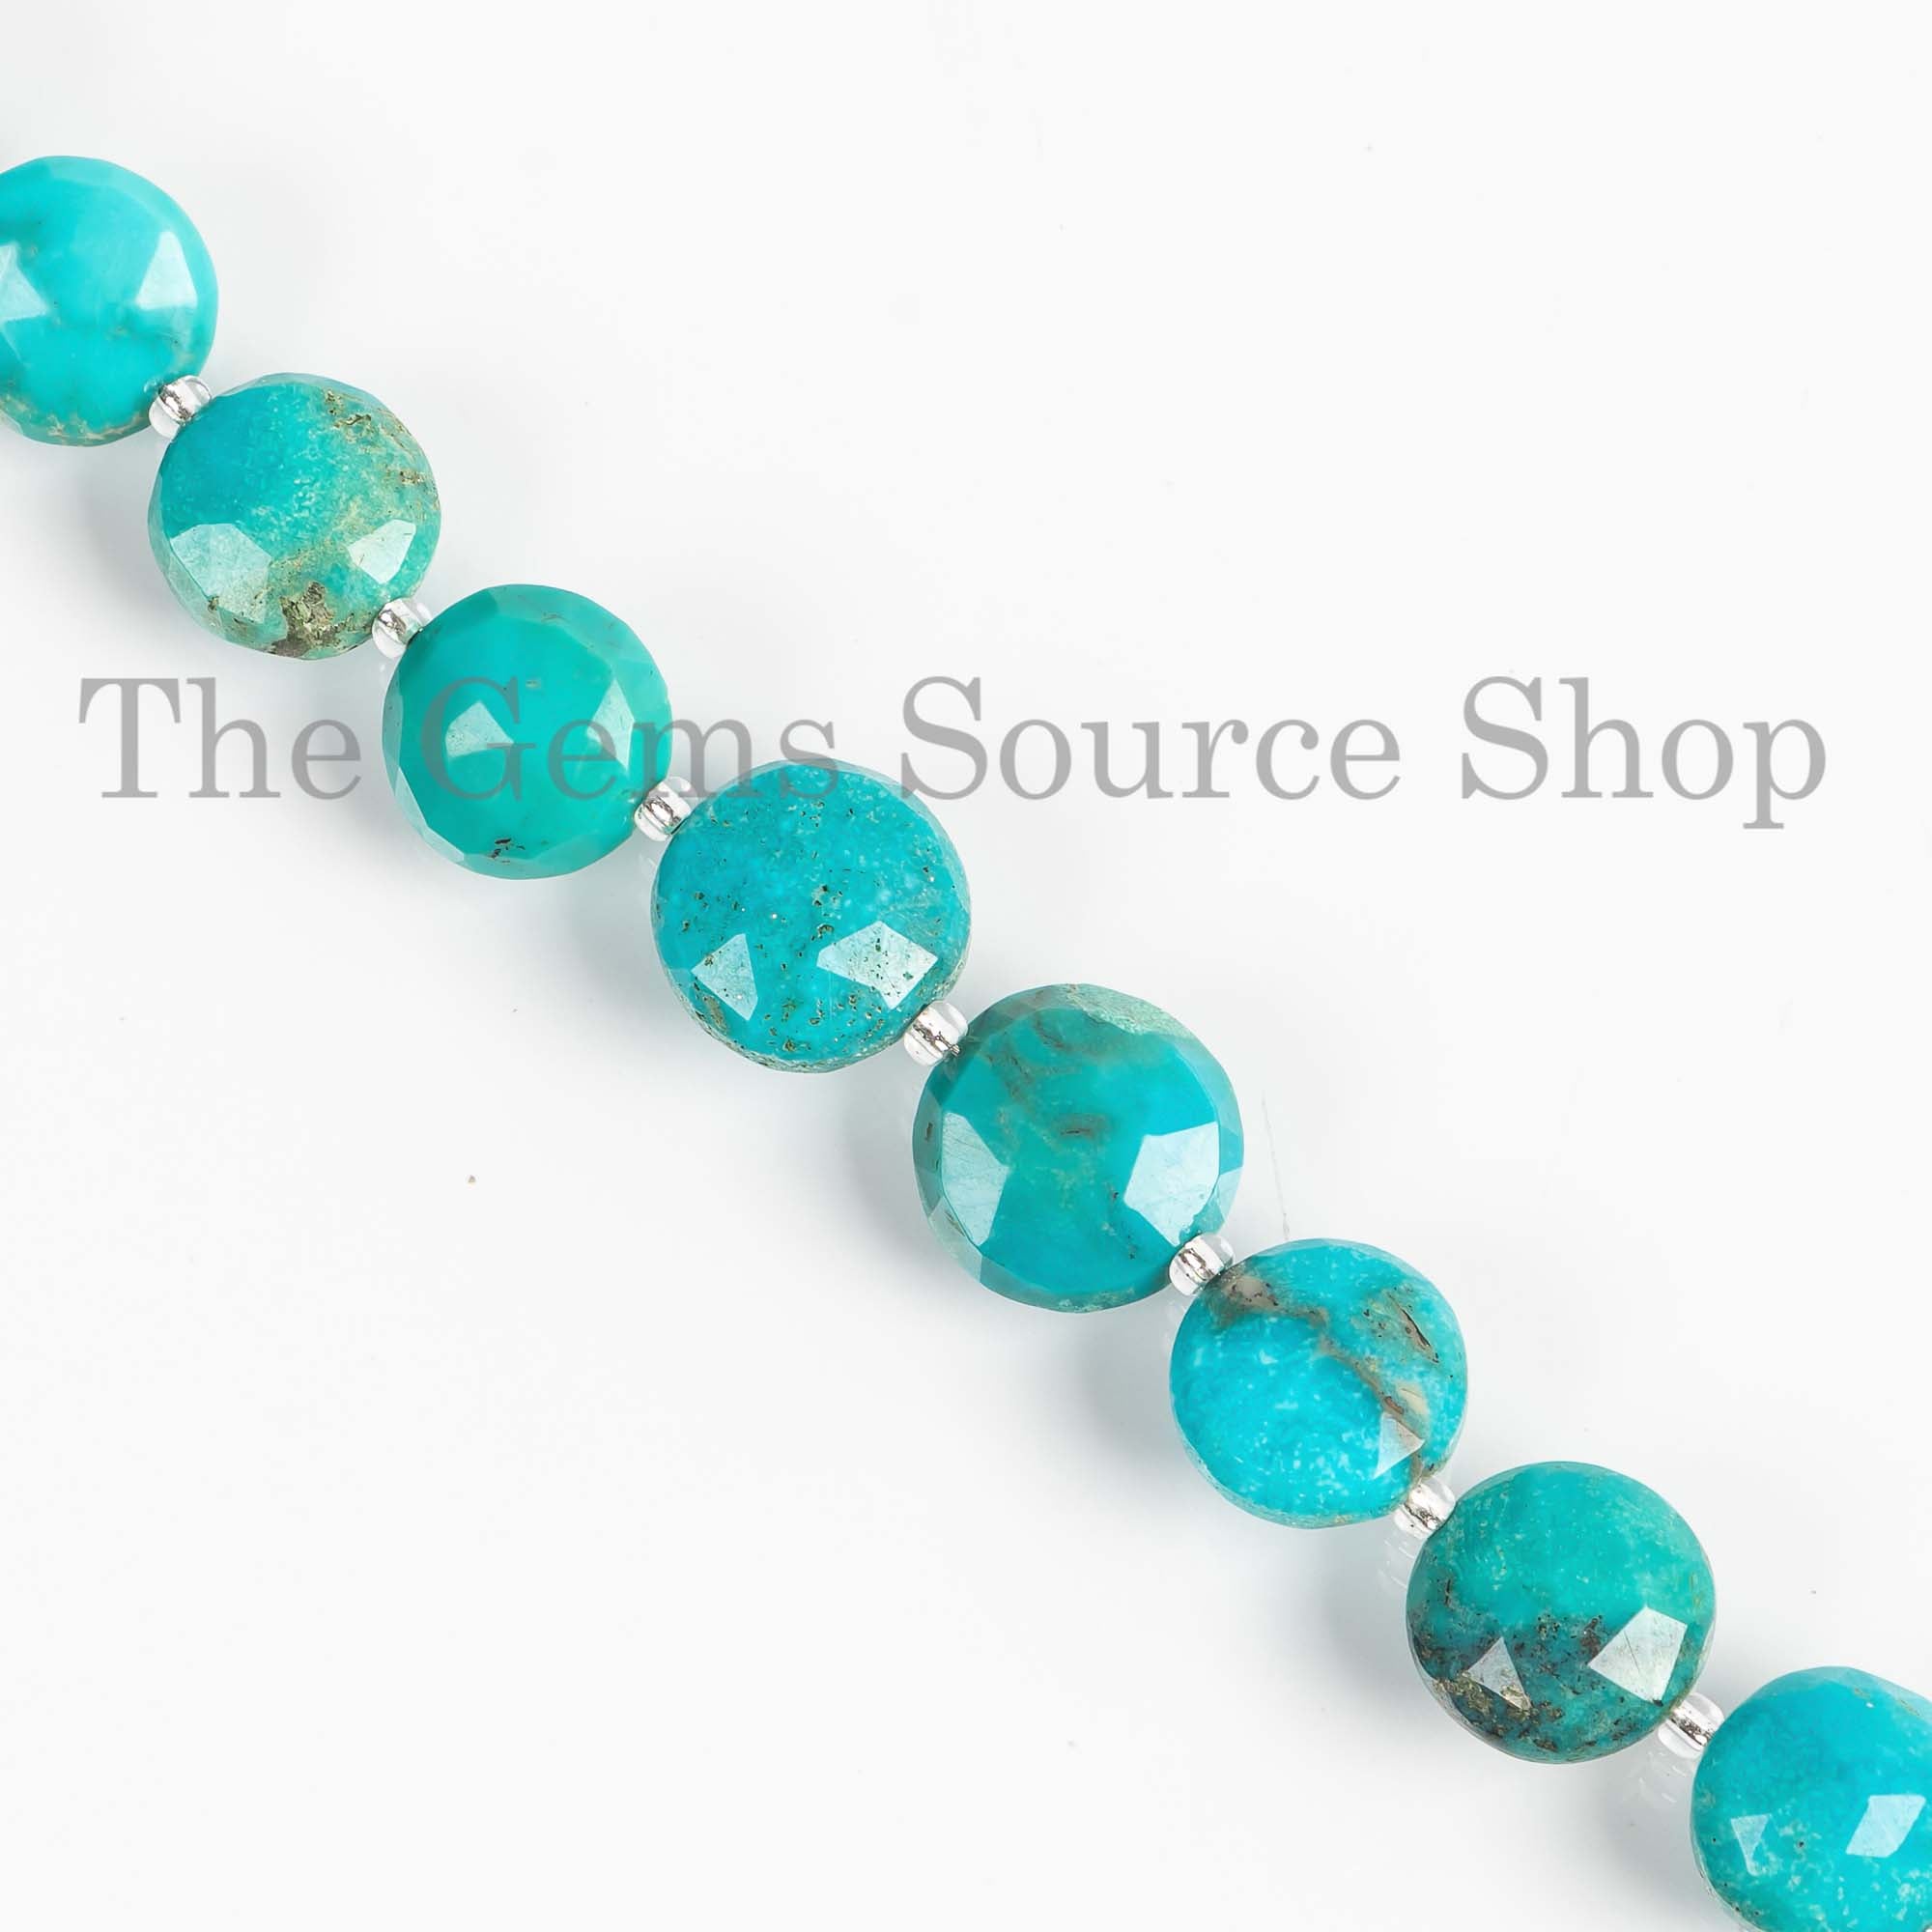 8.5-12mm Arizona Turquoise Coin Briolette, Turquoise Round Coin Beads, Turquoise Faceted Beads, Coin Beads, Beads For Jewelry